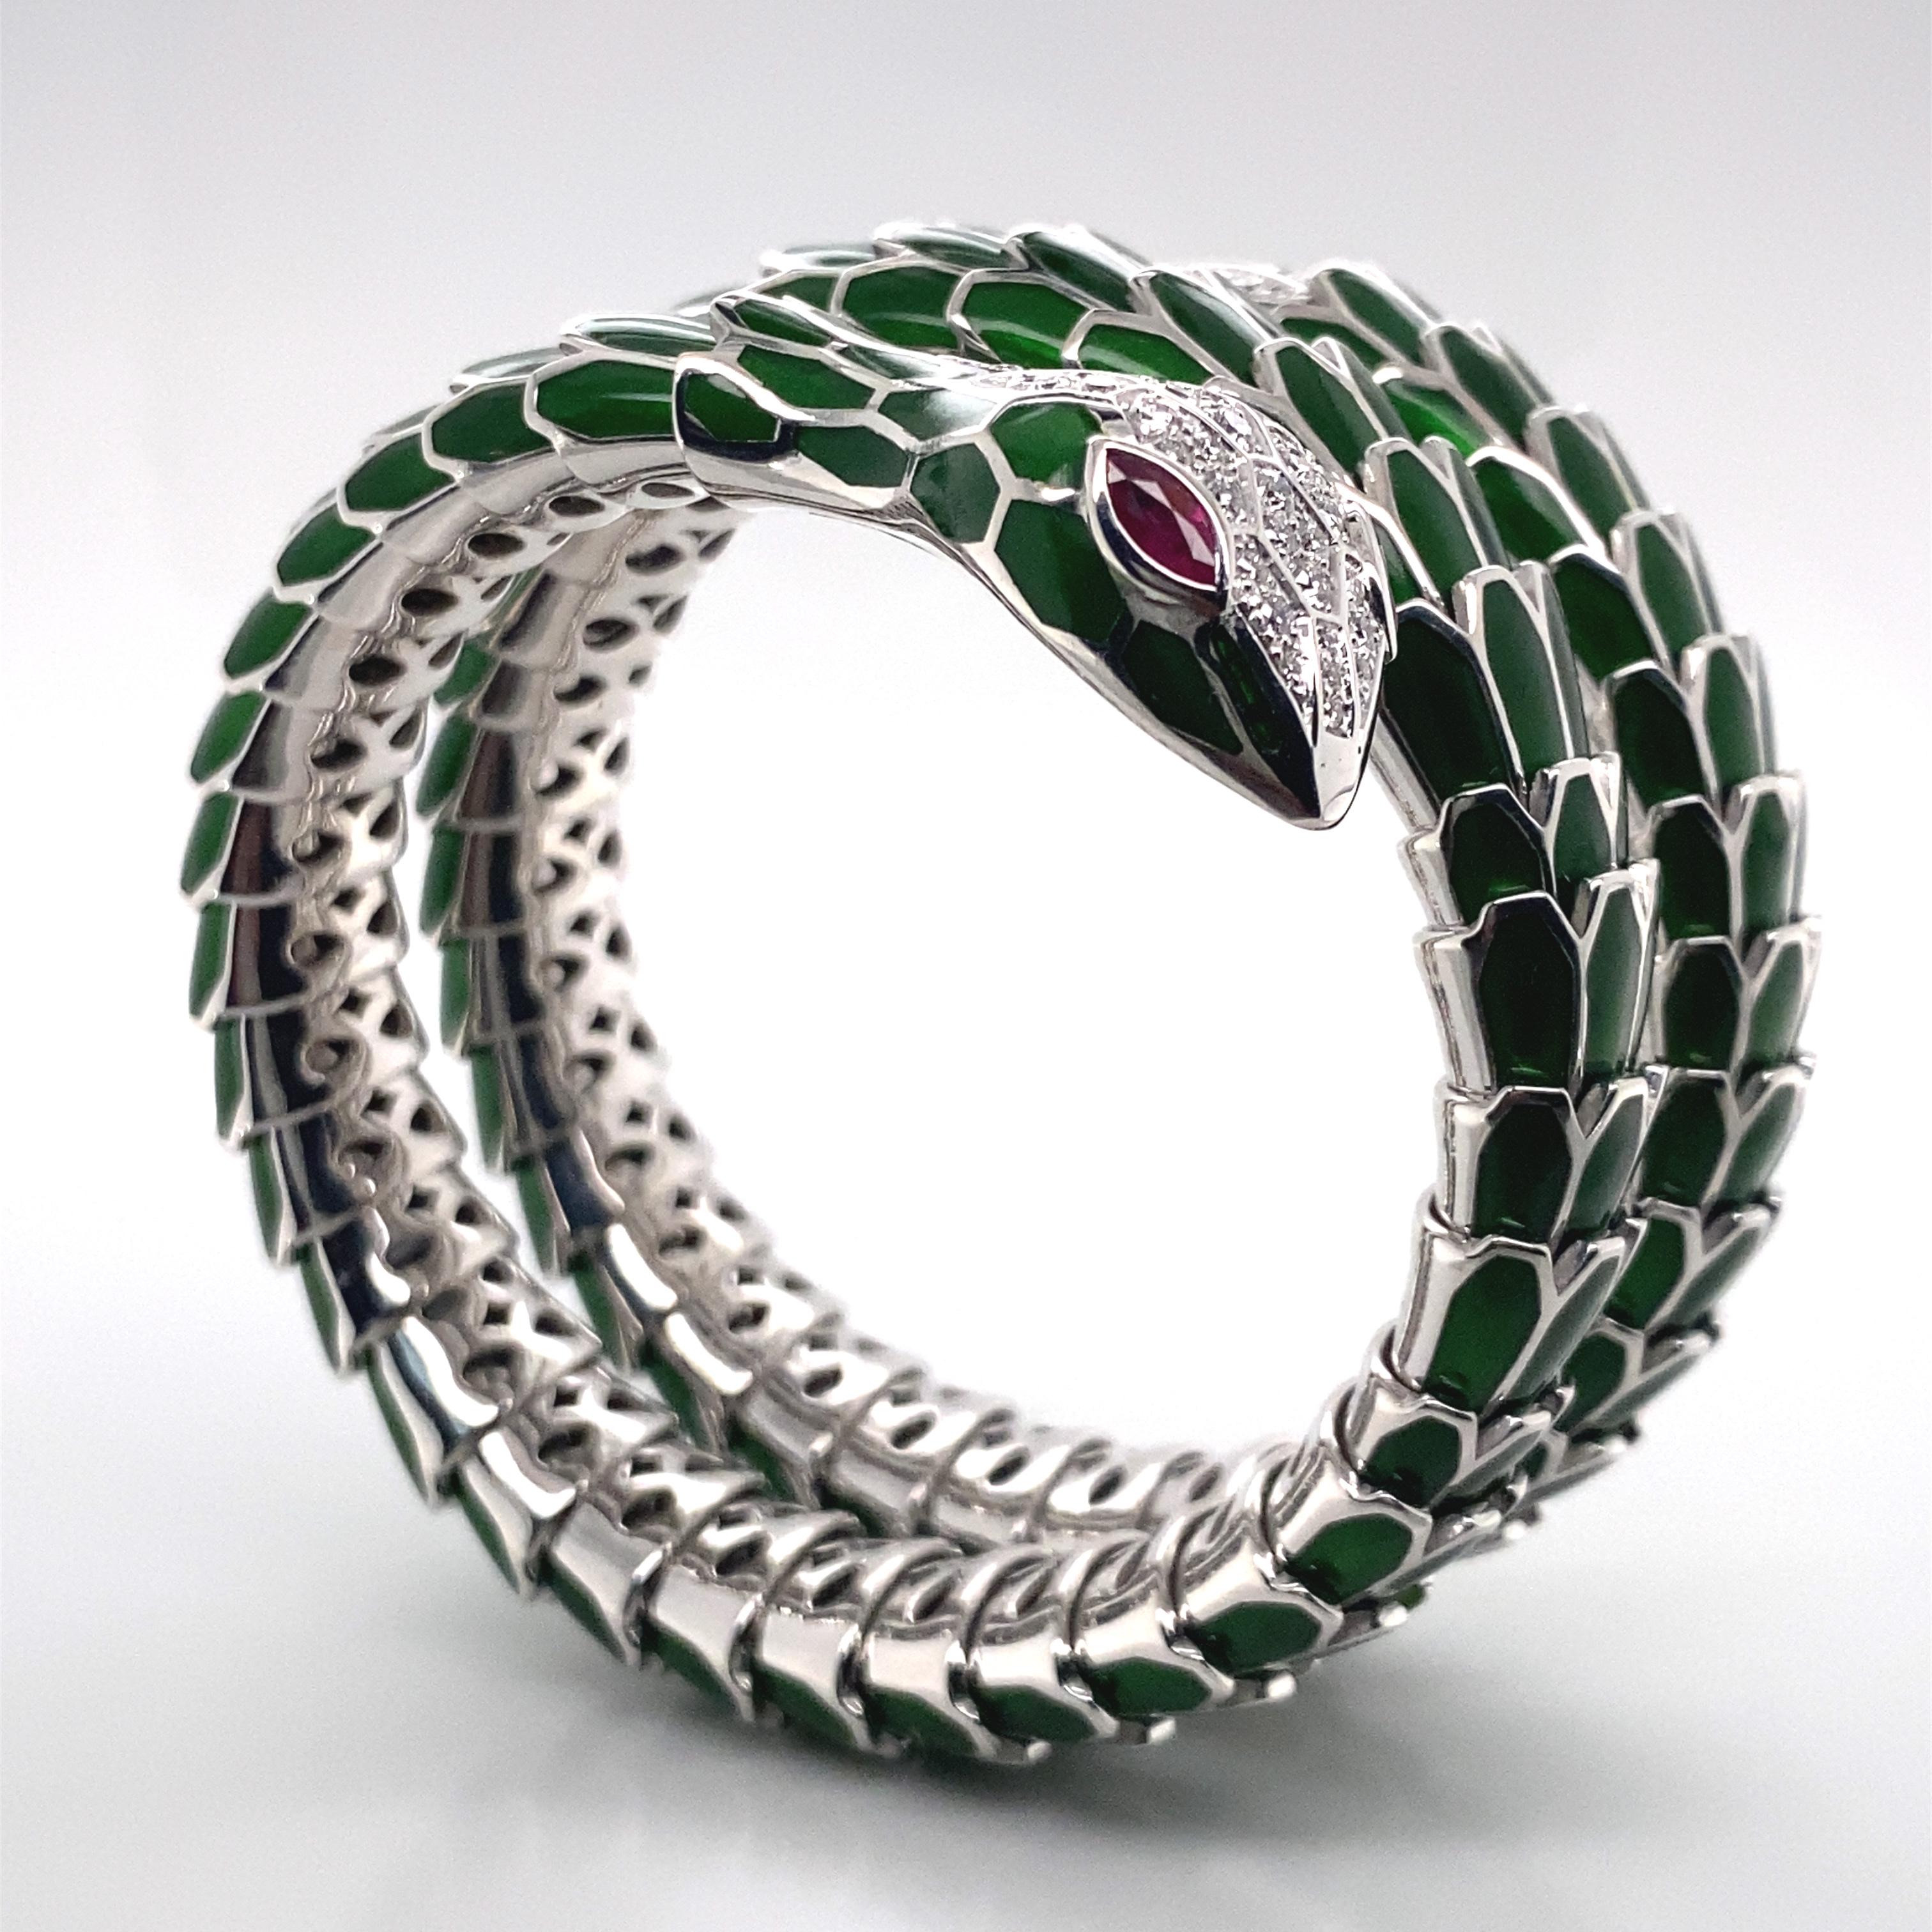 Set with Marquise cut Ruby eyes. Weighing 0.20 ct and detailed with round diamonds weighing approx. 0.70 ct. Green enamel Scales mounted in 18k White Gold and sterling silver. Inner Circumference 5.75 inches with Italian assay mark. 6in- 7.50 in